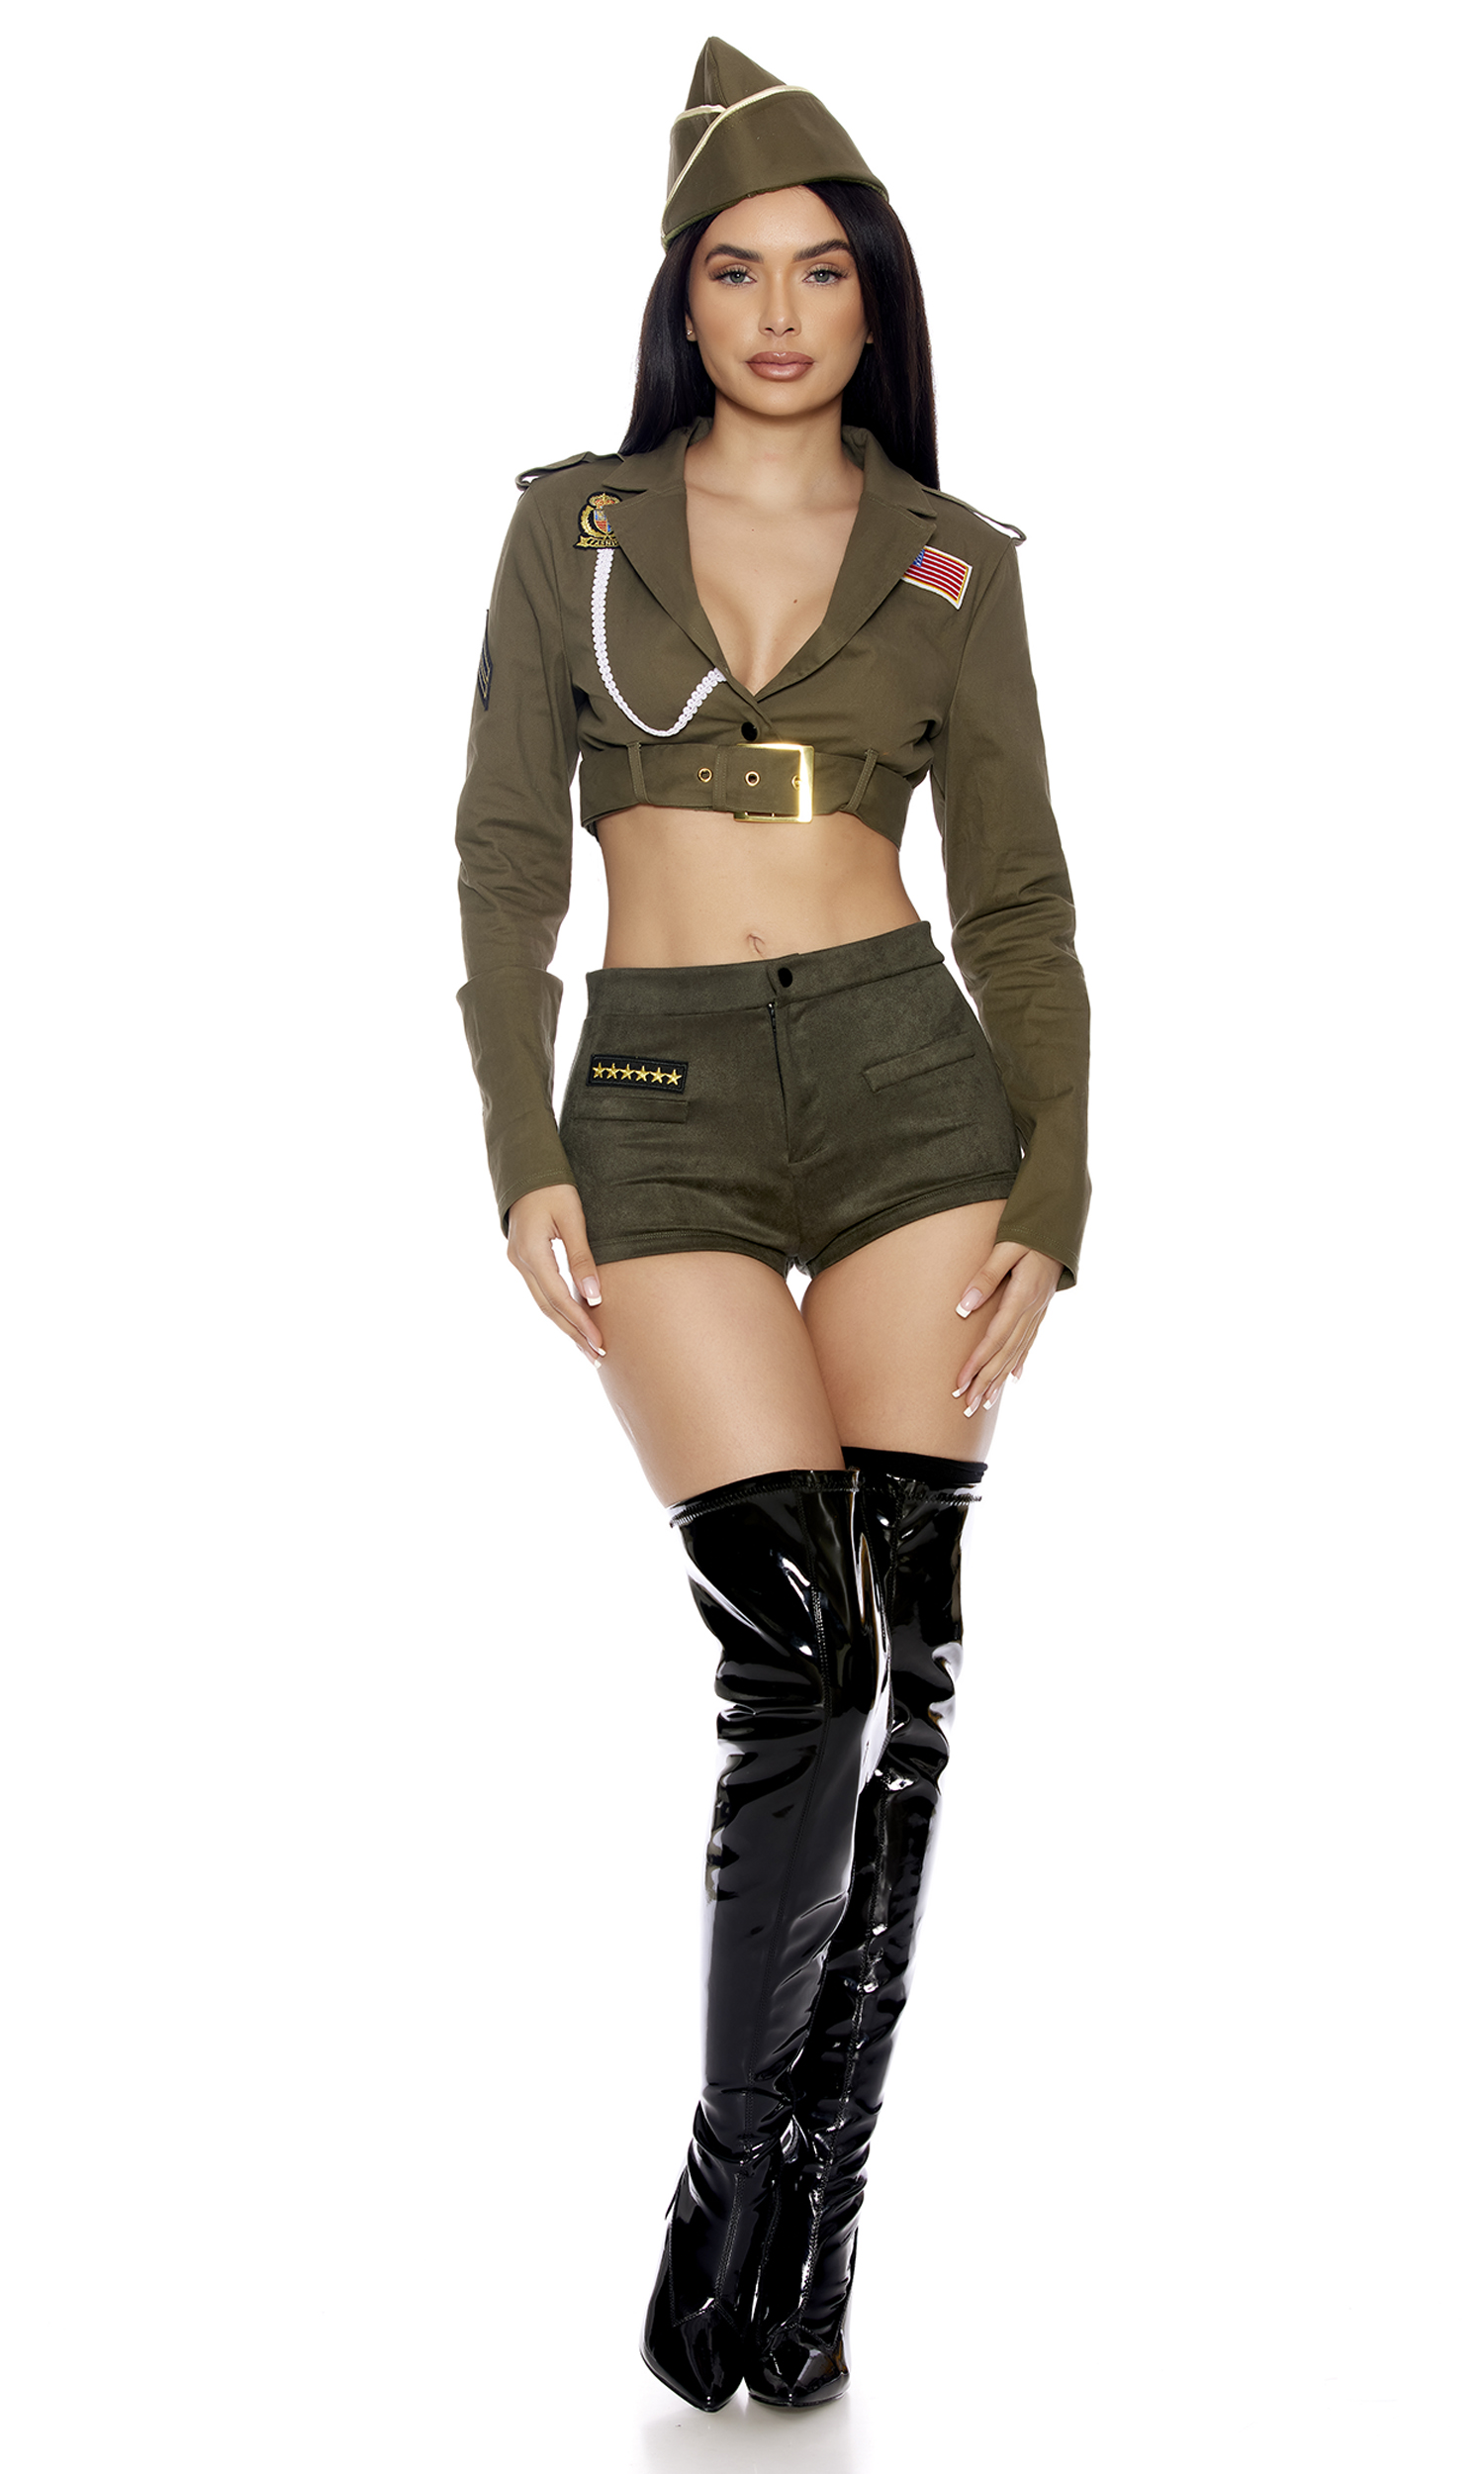 https://www.thecostumeland.com/images/zoom/fr553139-command-attention-military-women.jpg